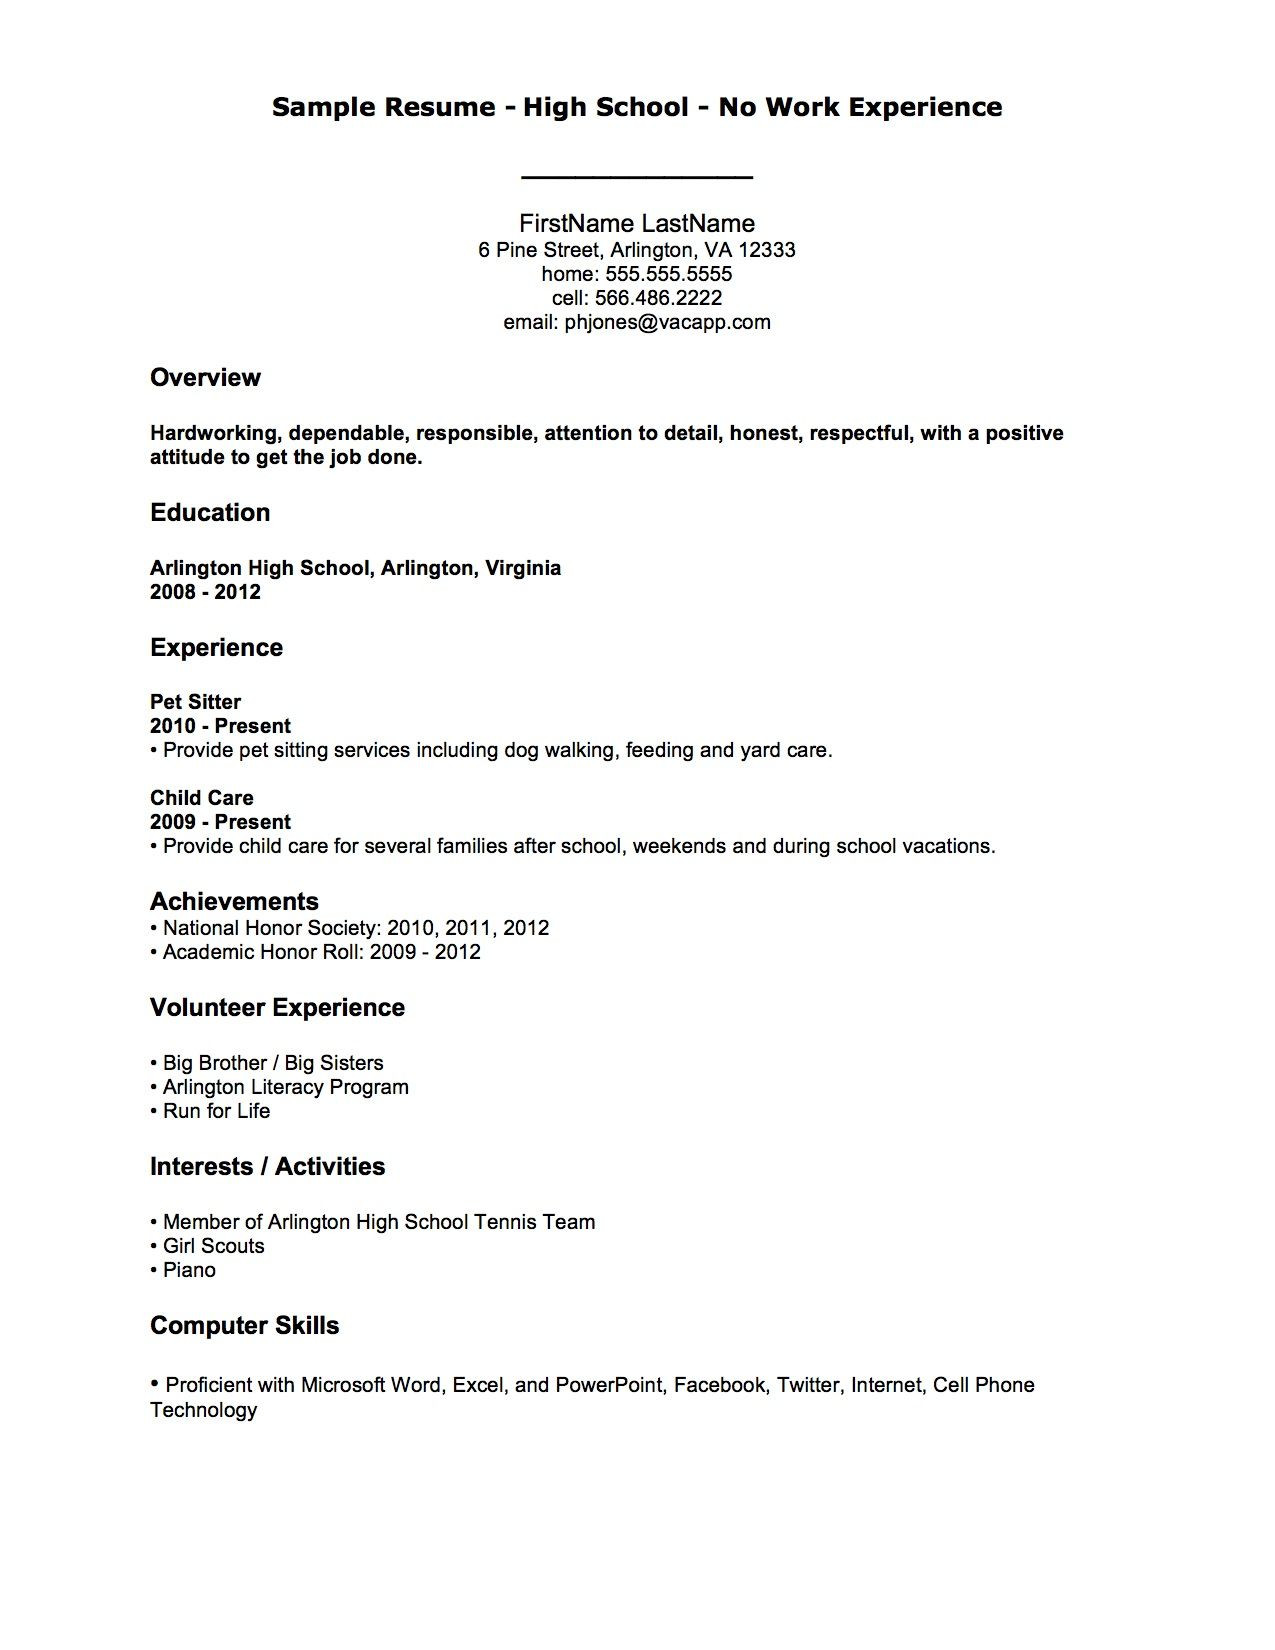 Resume Sample for someone with No Work Experience Resume Examples with No Job Experience , #examples #experience …